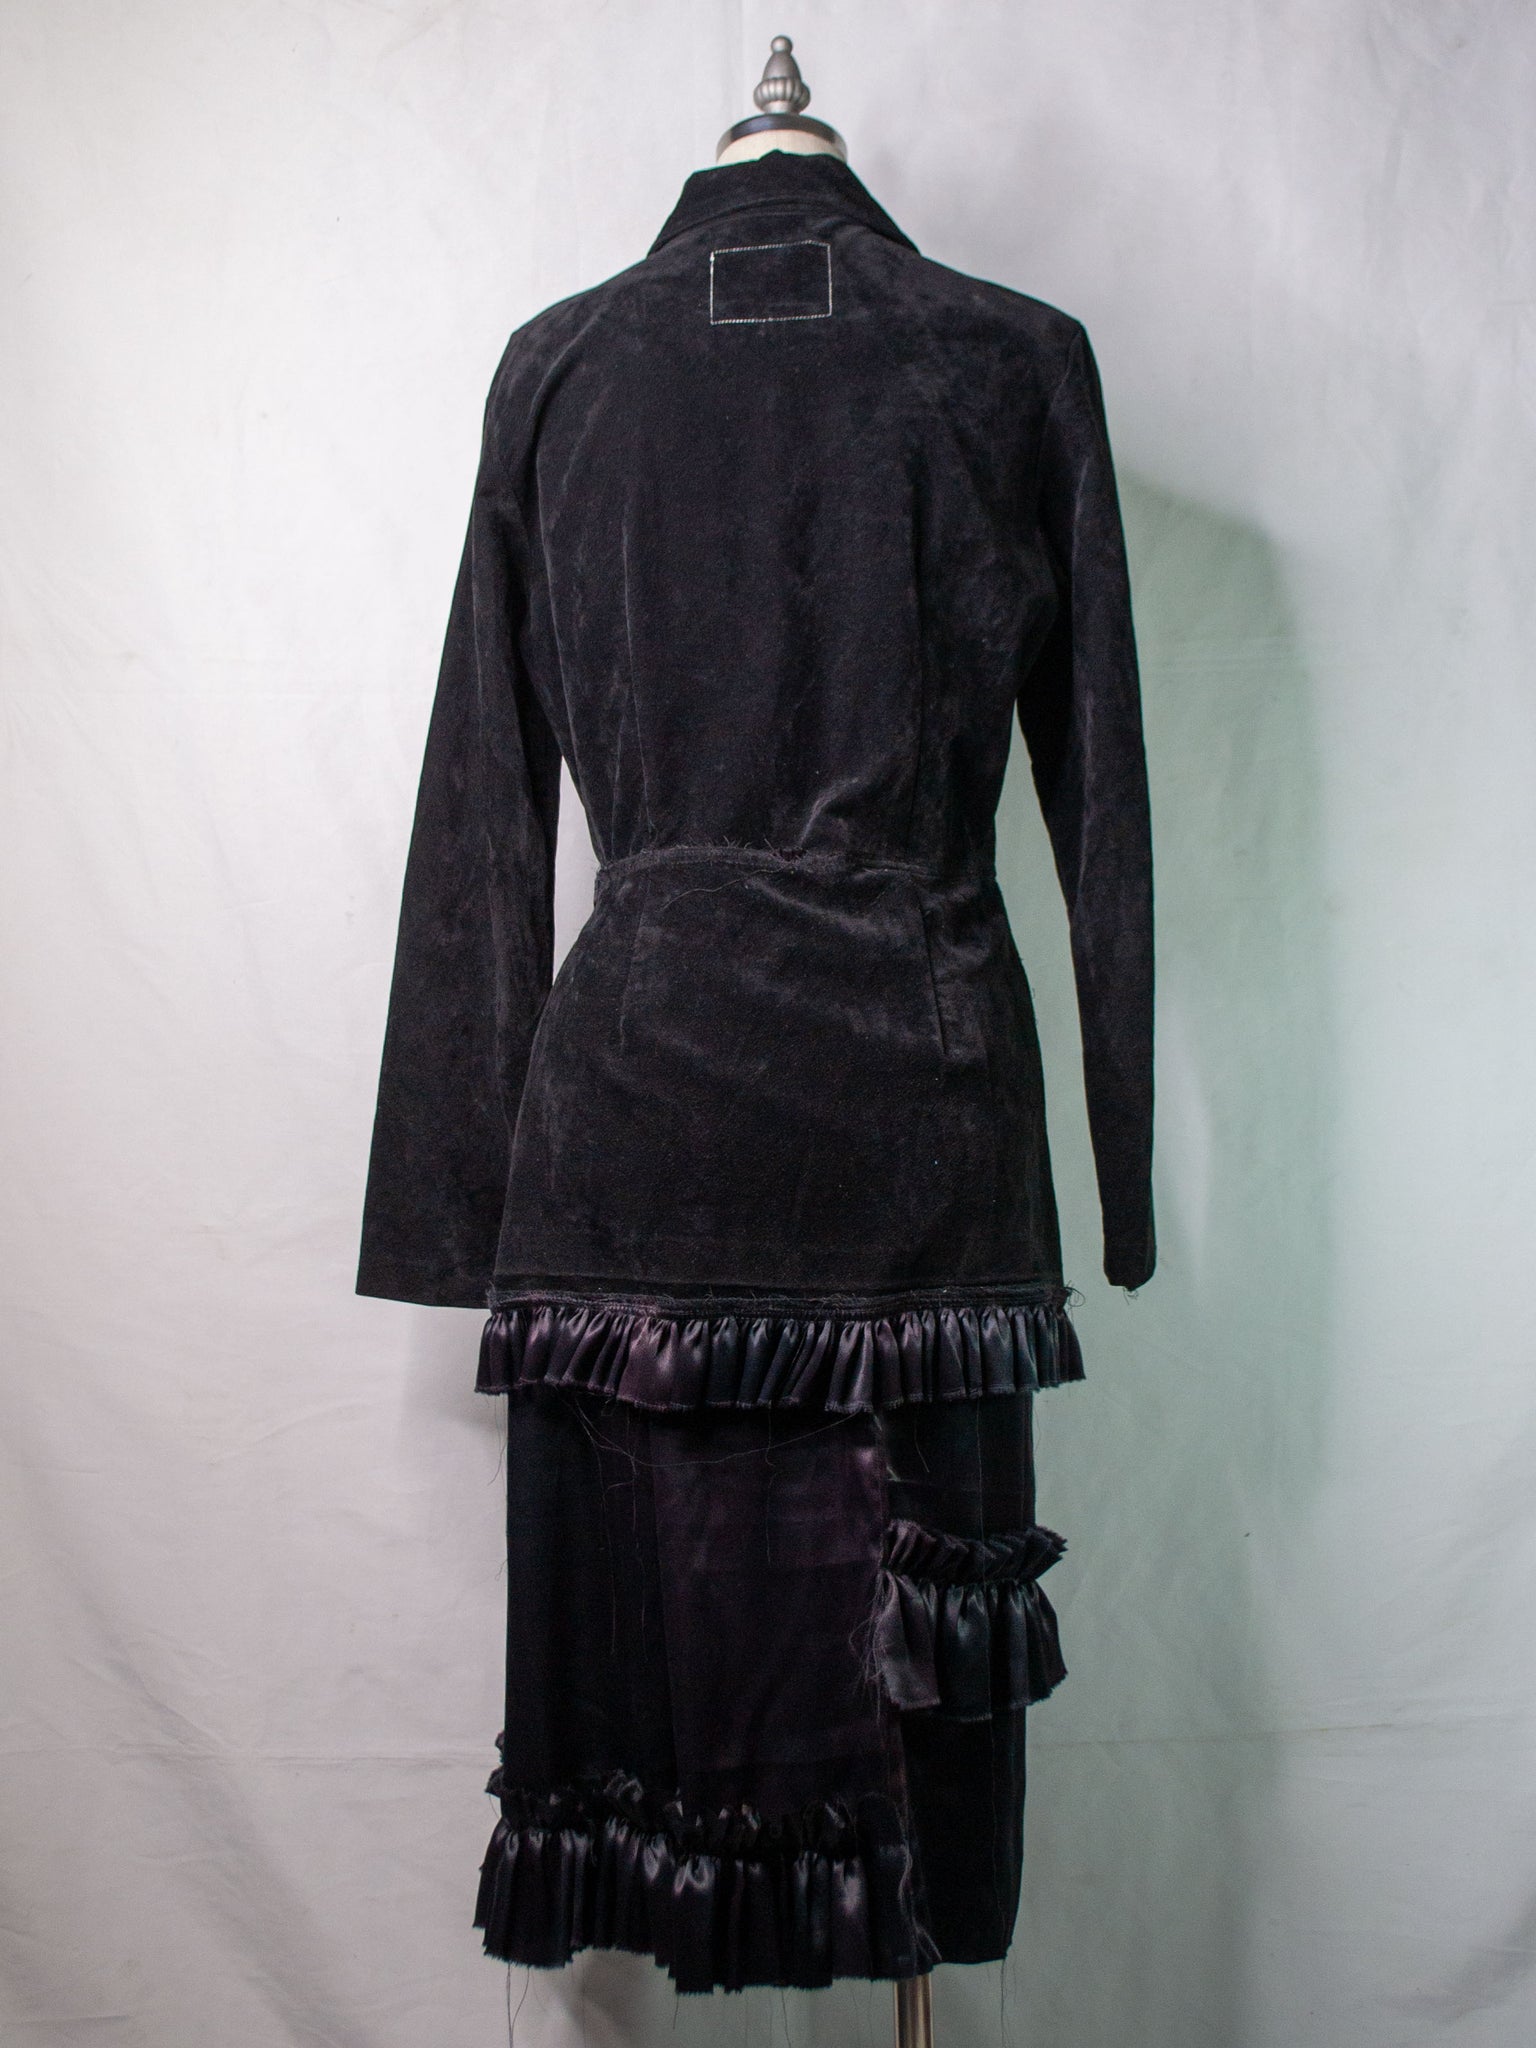 Weathered Reworked 70s Black Rayon Coat with Extended Skirt Coat (Women's US Small)